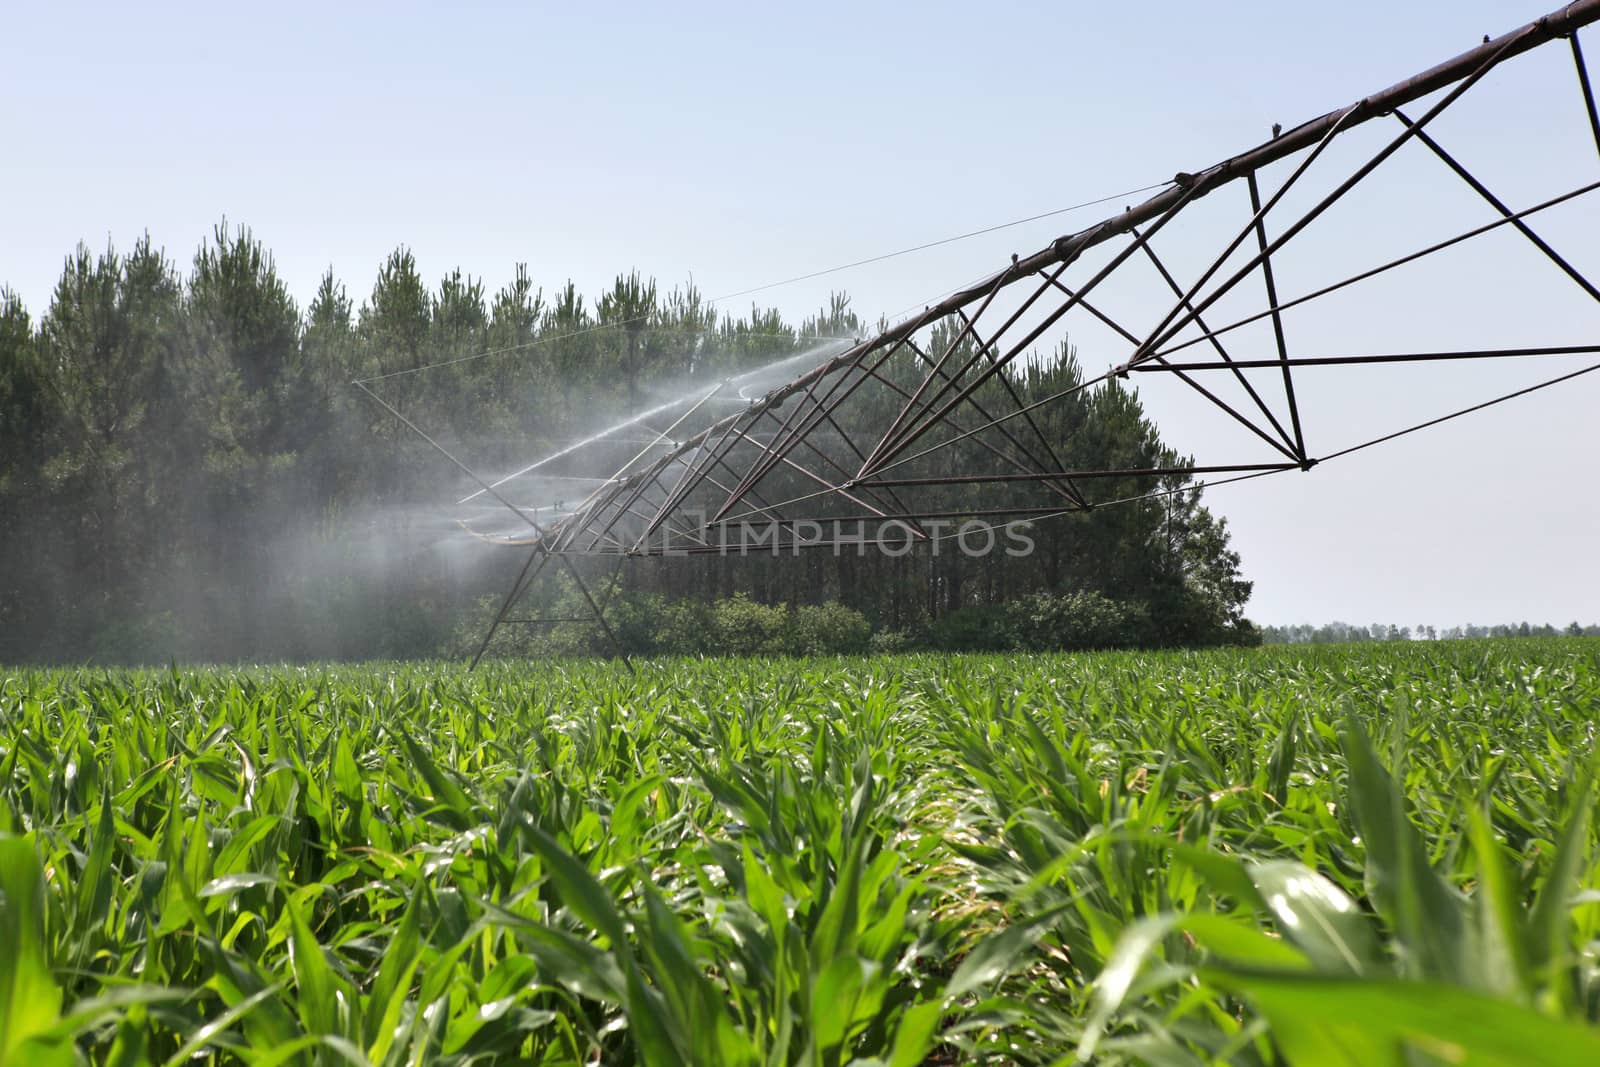 Irrigation system in a field